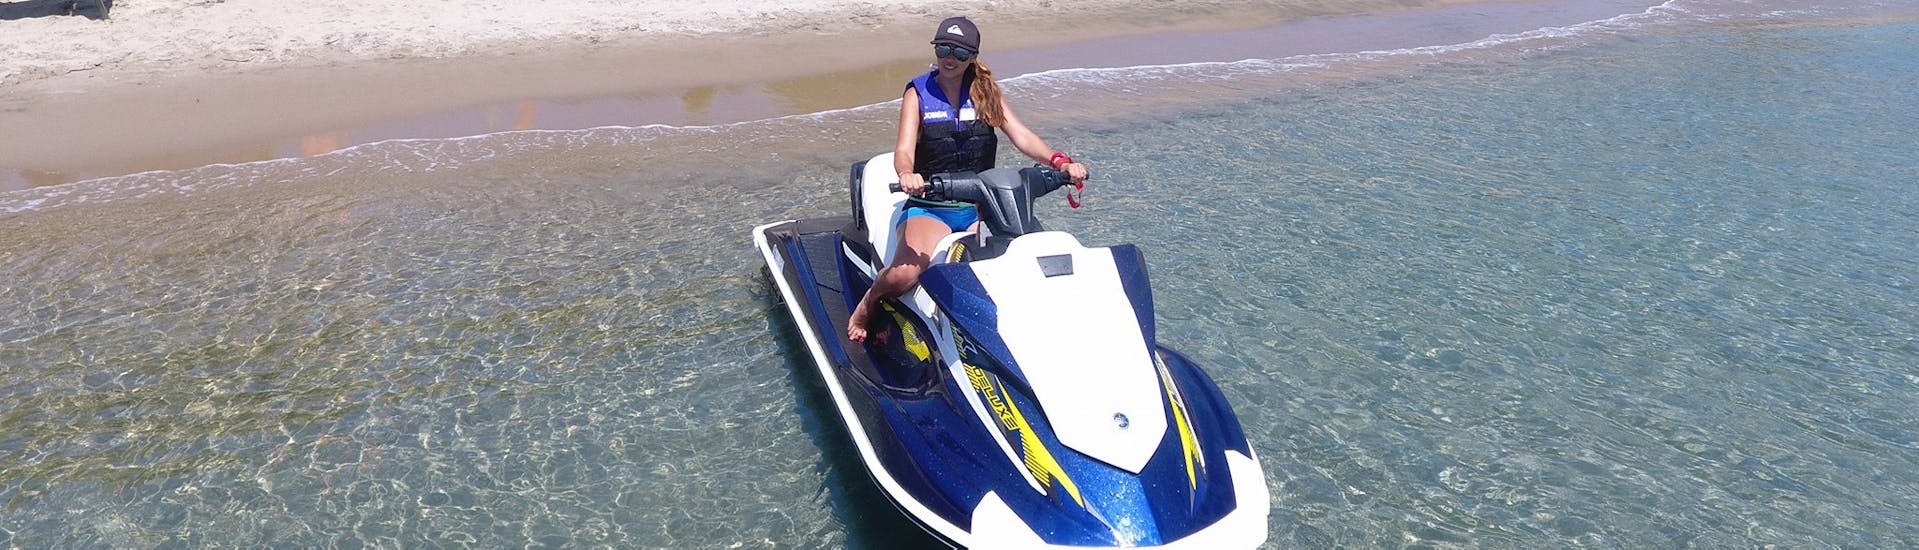 A woman on a jet ski from the Jet Ski at Paradise Beach in Kos with Water Club Paradise Beach Kos.